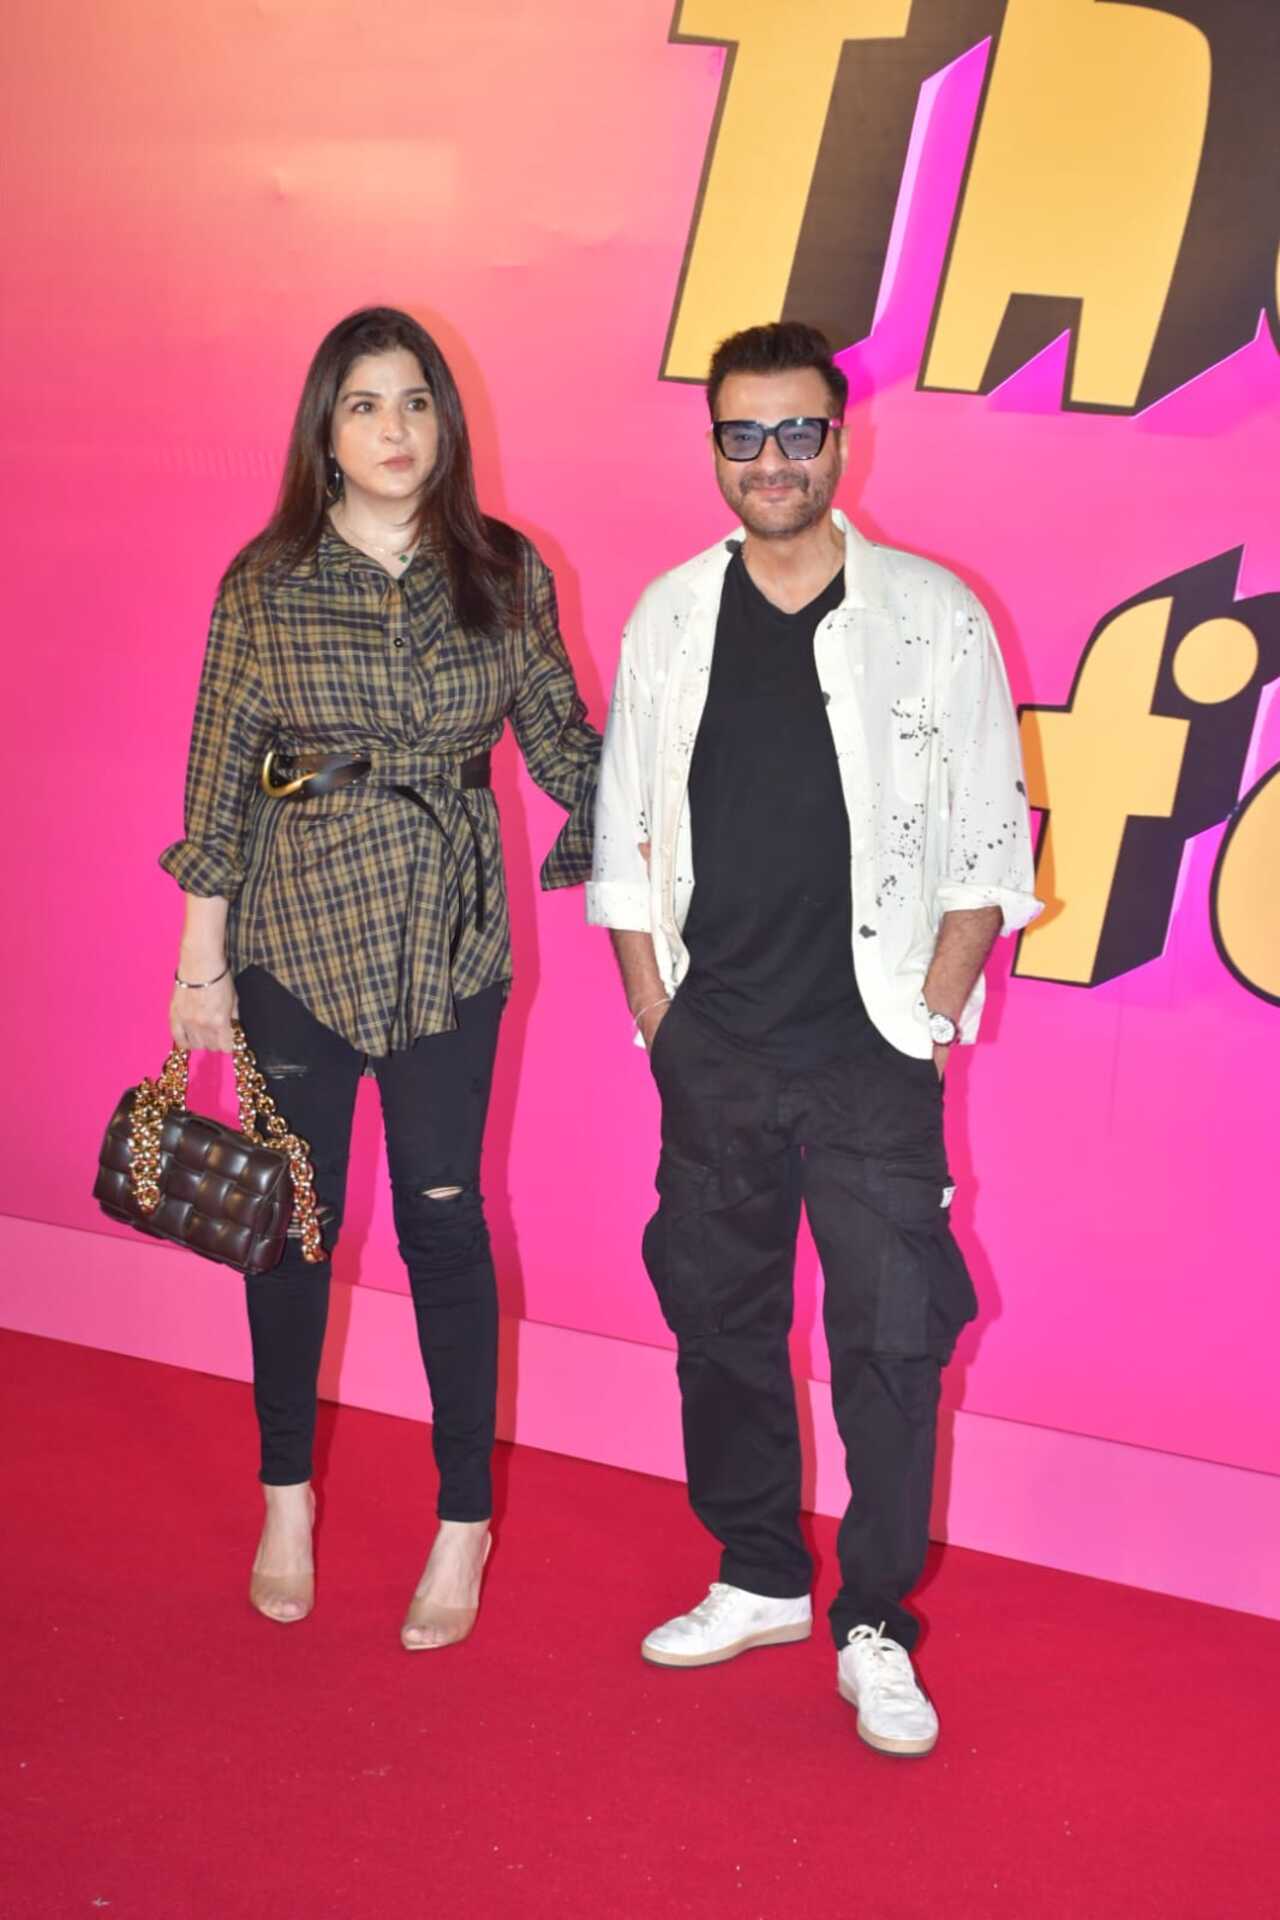 Sanjay Kapoor and Maheep Kapoor posed for the paparazzi on the red carpet